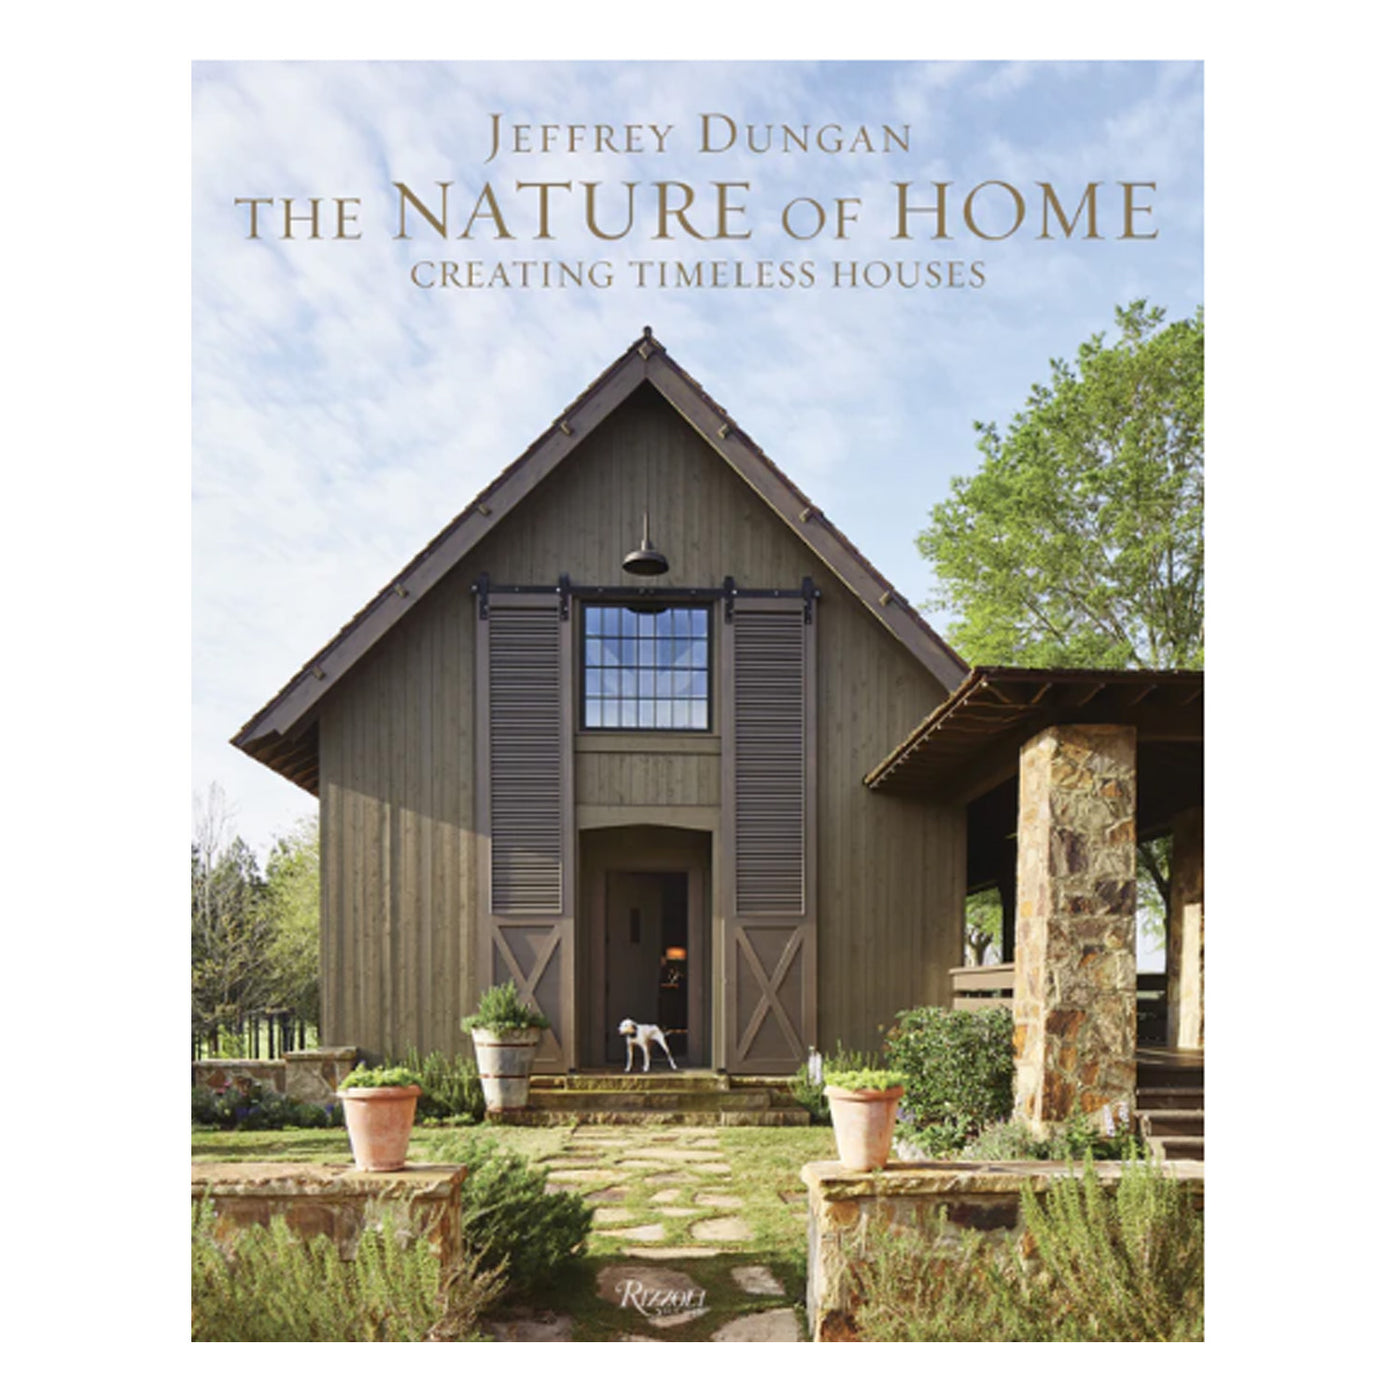 book titled The Nature of Home